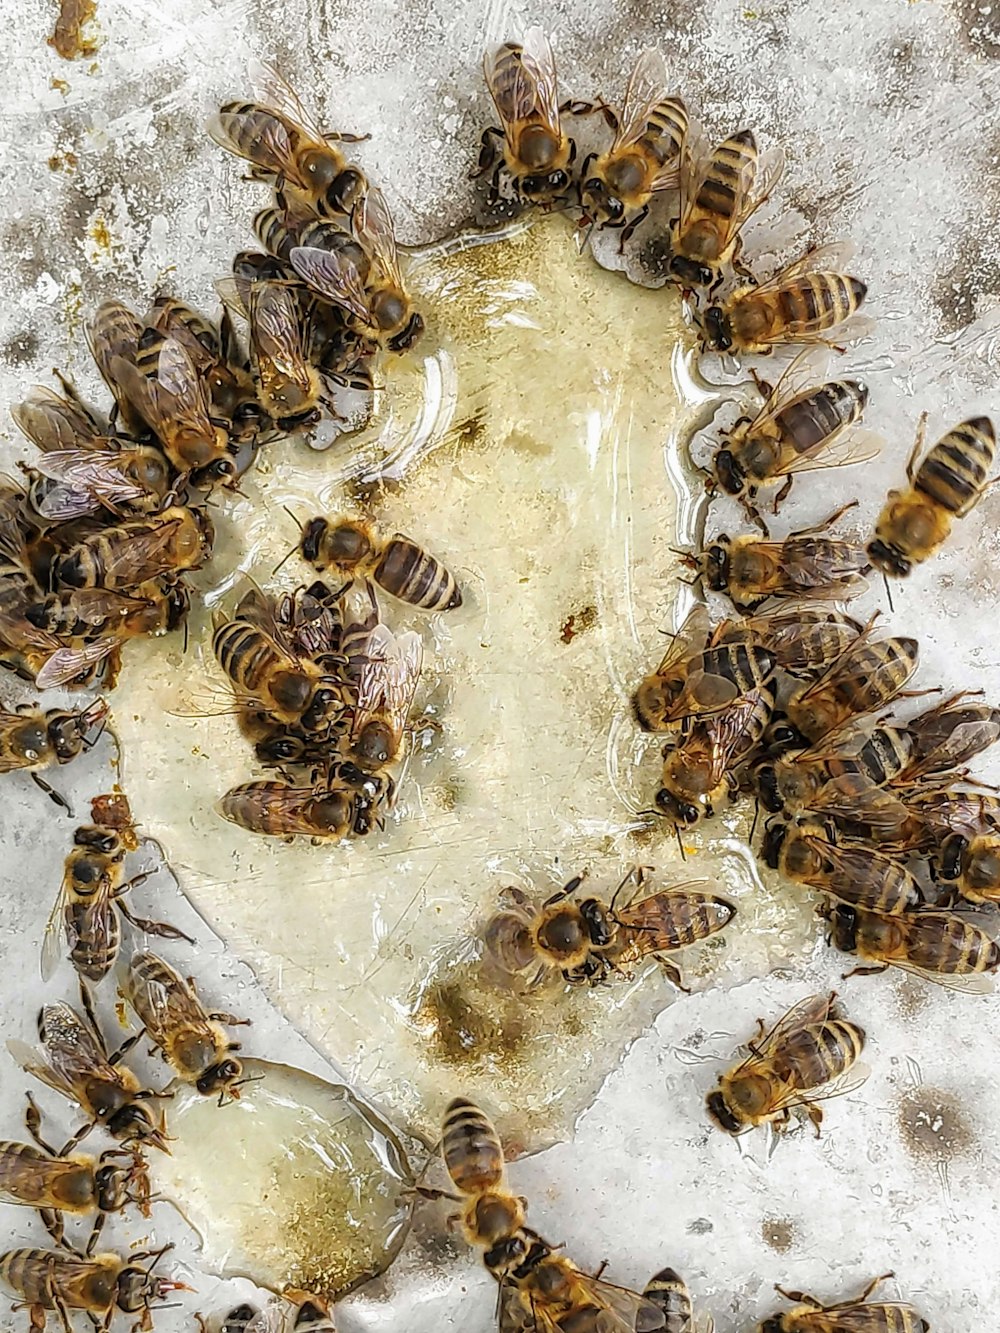 group of bees